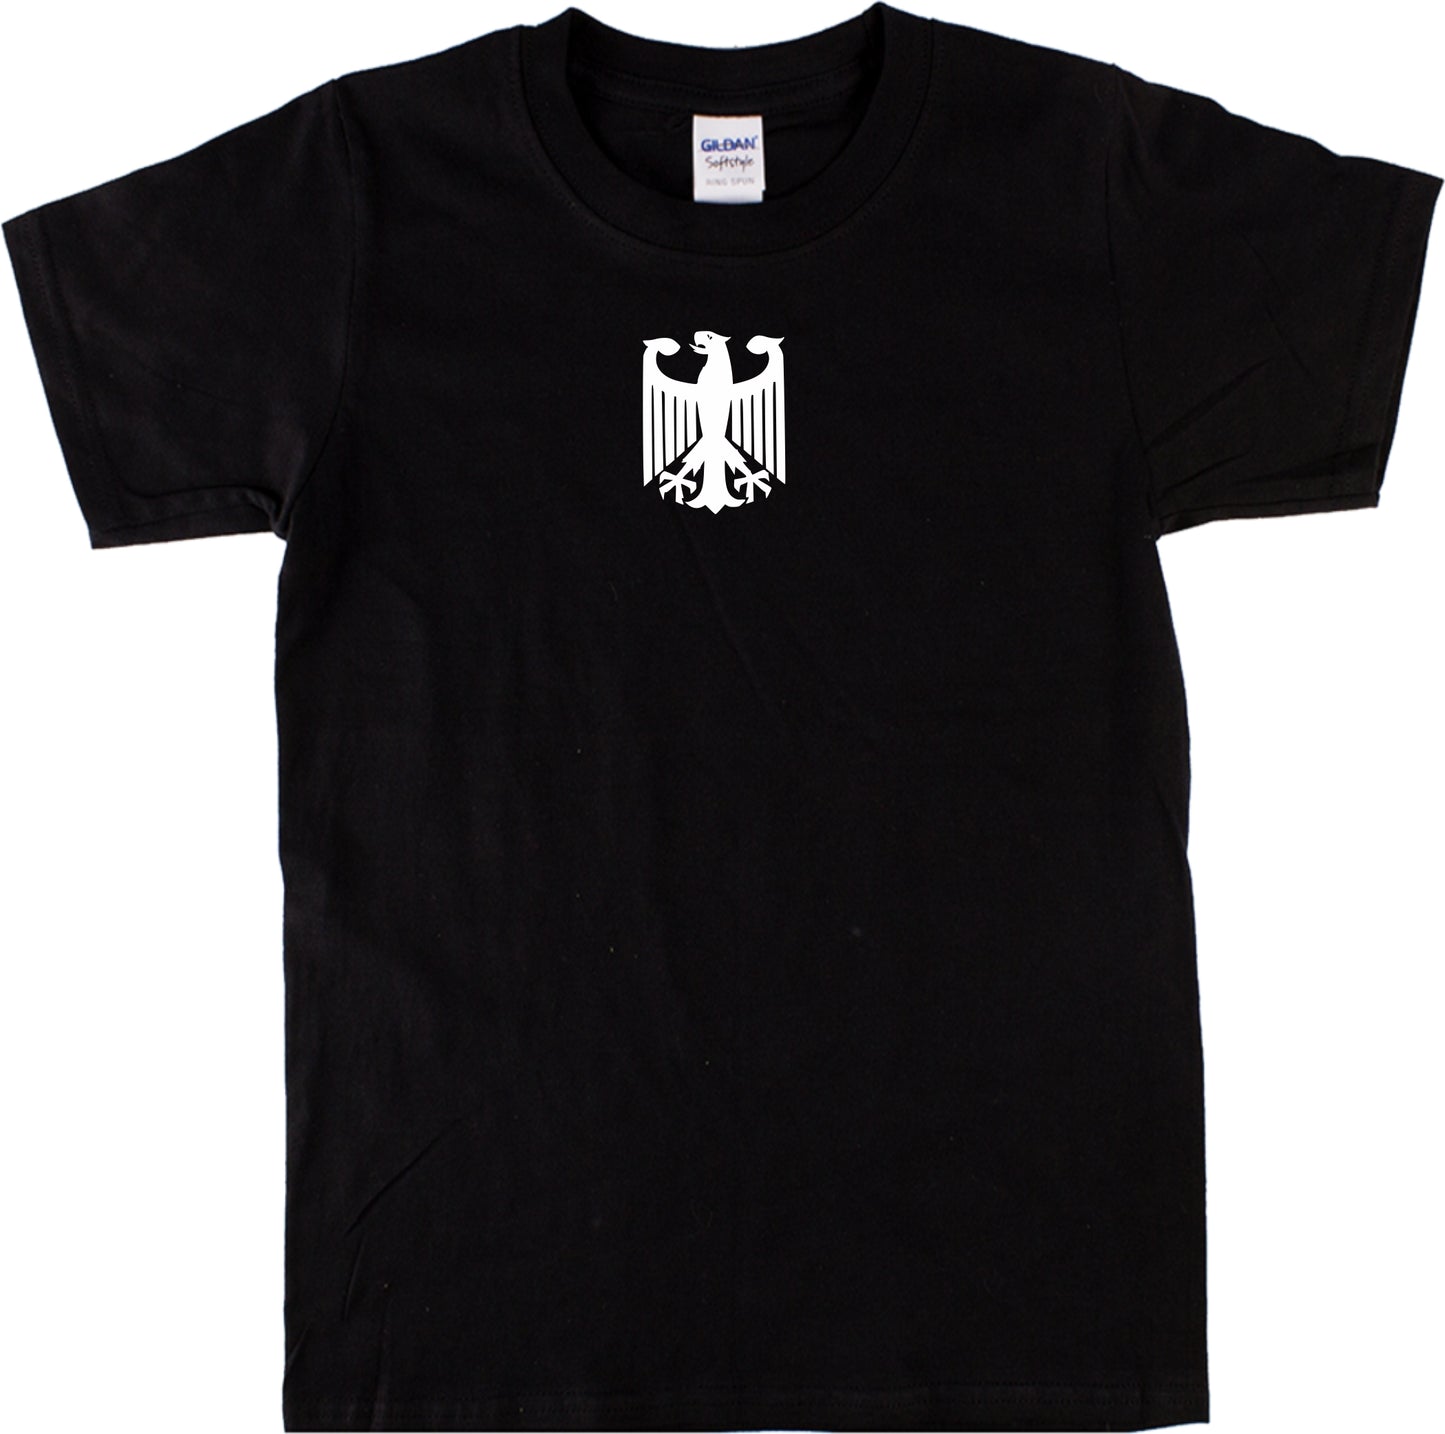 Retro Bundeswehr Military Eagle T-Shirt - German Army, 70s Style, Various Colours